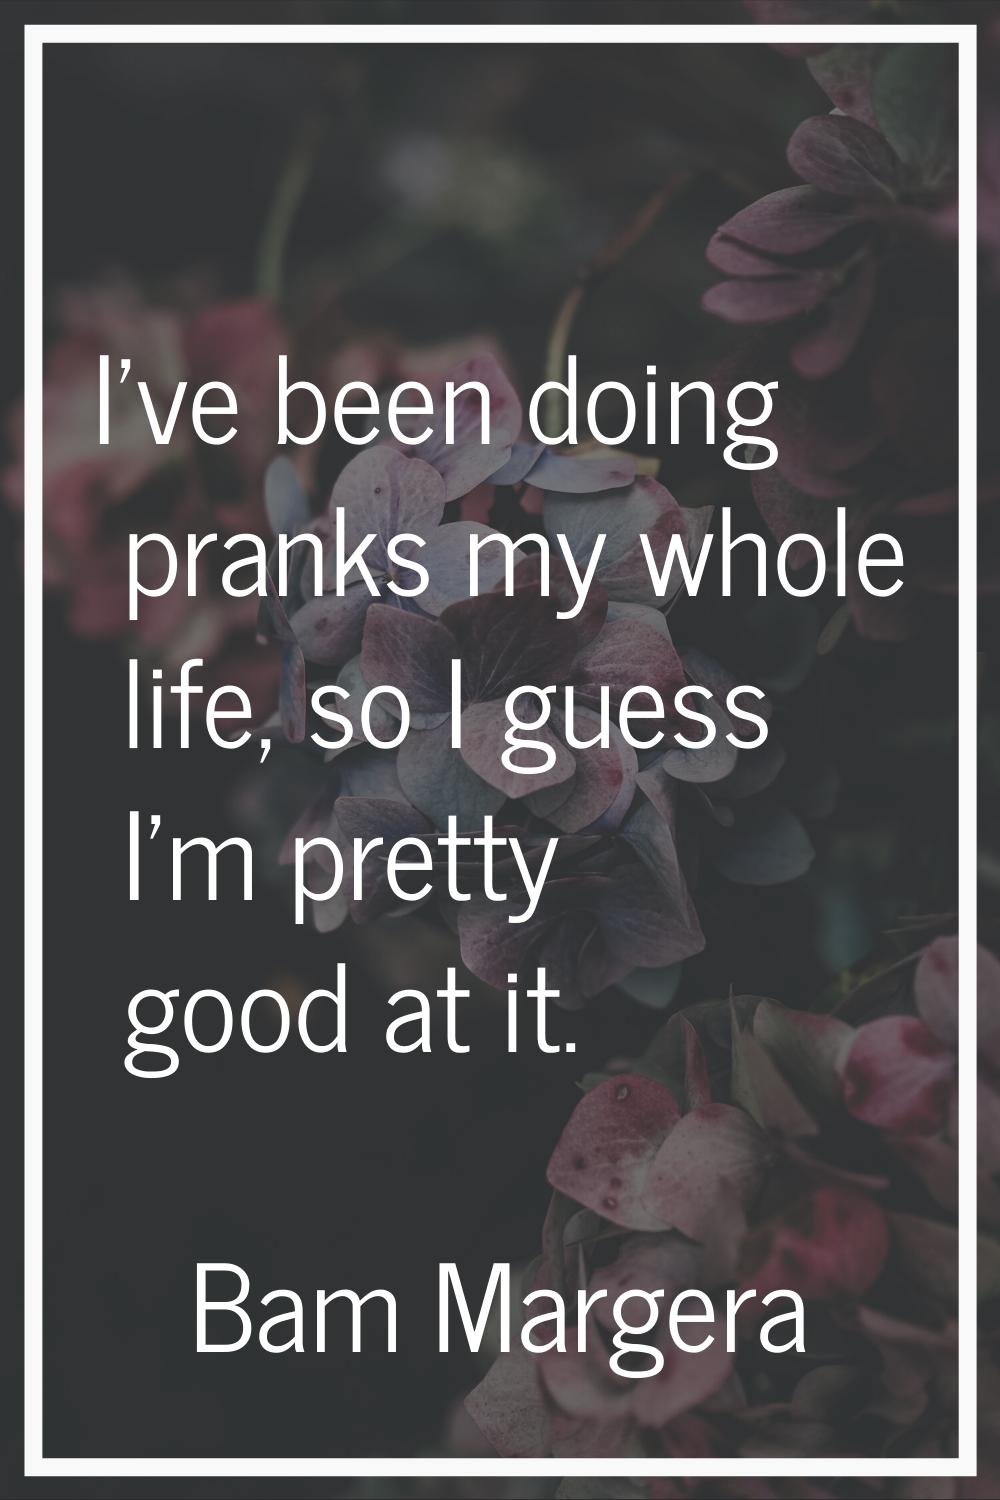 I've been doing pranks my whole life, so I guess I'm pretty good at it.